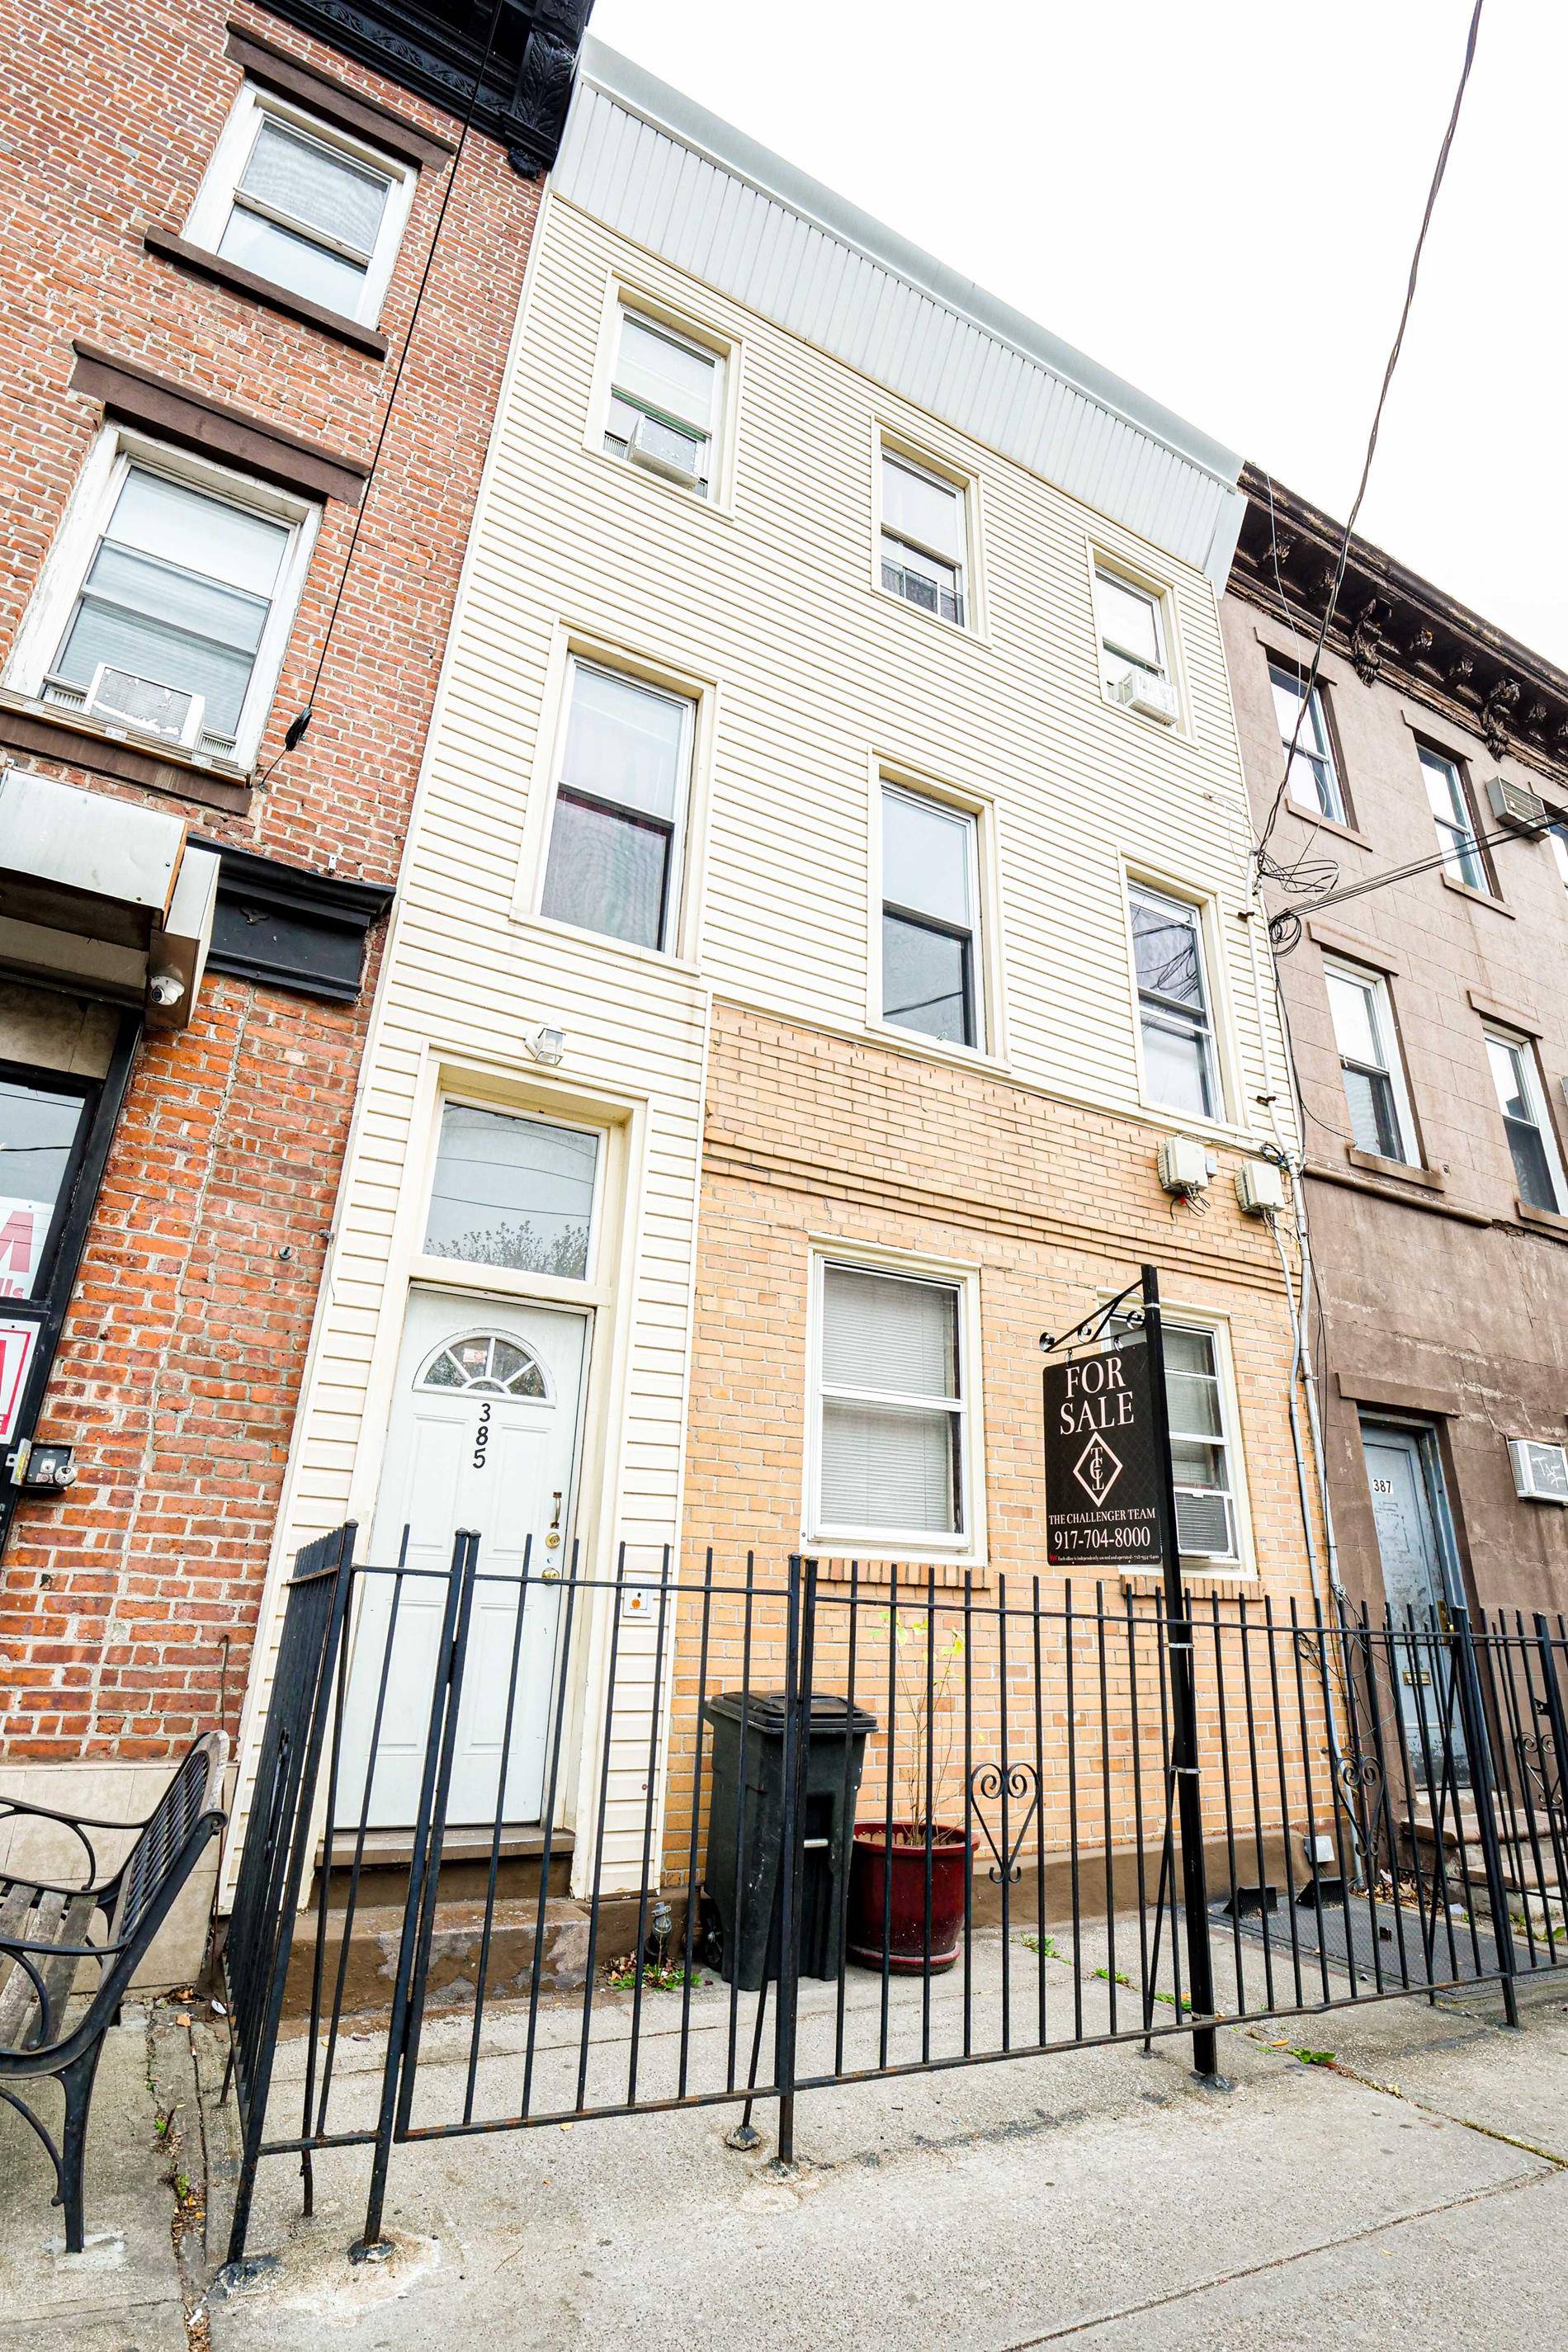 WELCOME TO THIS FULL BRICK 3 FAMILY HOME IS CONVENIENTLY LOCATED A PRIME AREA 0F BEAUTIFUL RED HOOK BROOKLYN.